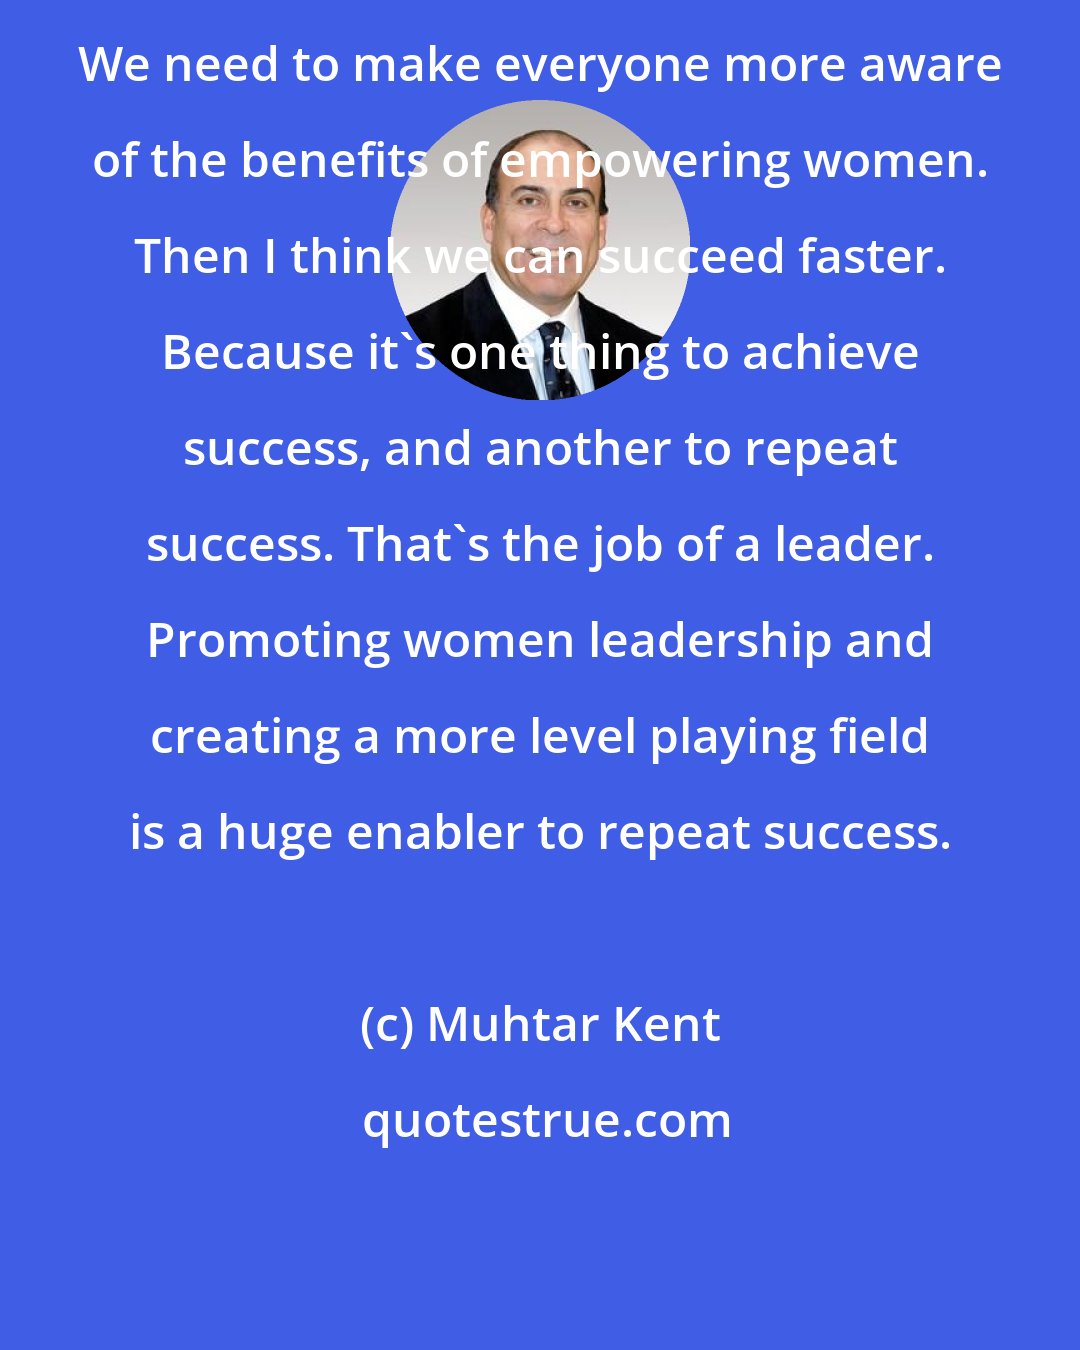 Muhtar Kent: We need to make everyone more aware of the benefits of empowering women. Then I think we can succeed faster. Because it's one thing to achieve success, and another to repeat success. That's the job of a leader. Promoting women leadership and creating a more level playing field is a huge enabler to repeat success.